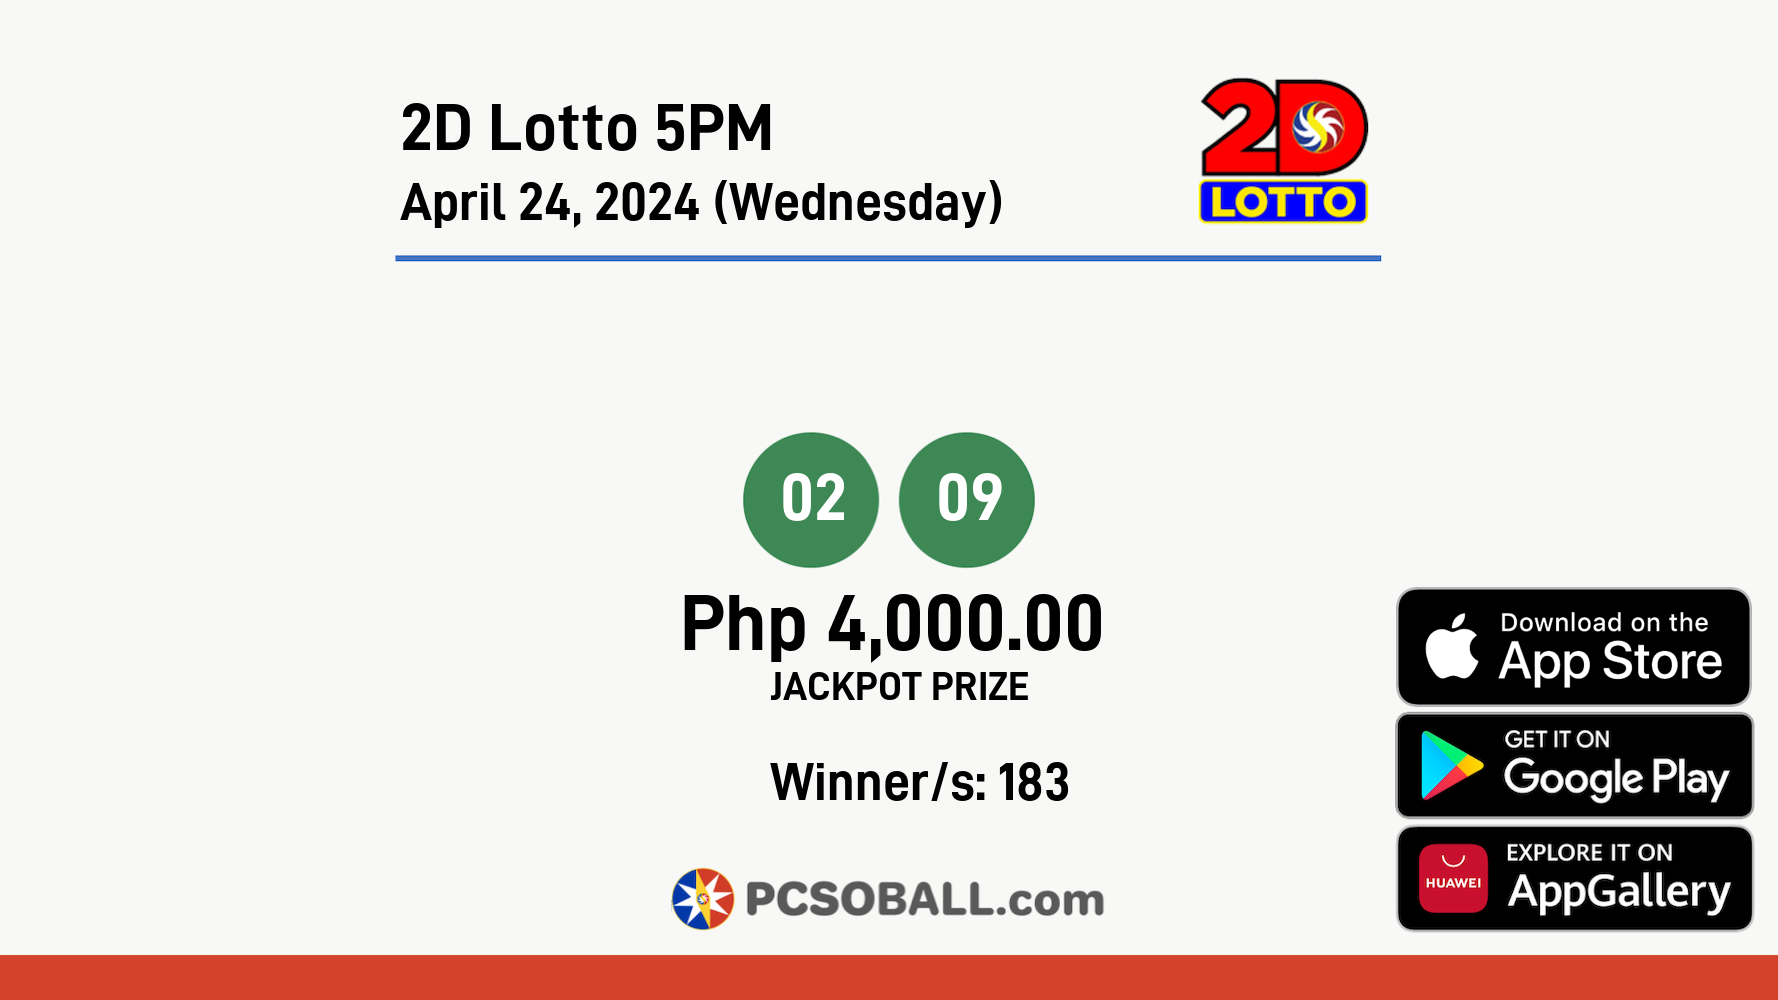 2D Lotto 5PM April 24, 2024 (Wednesday) Result